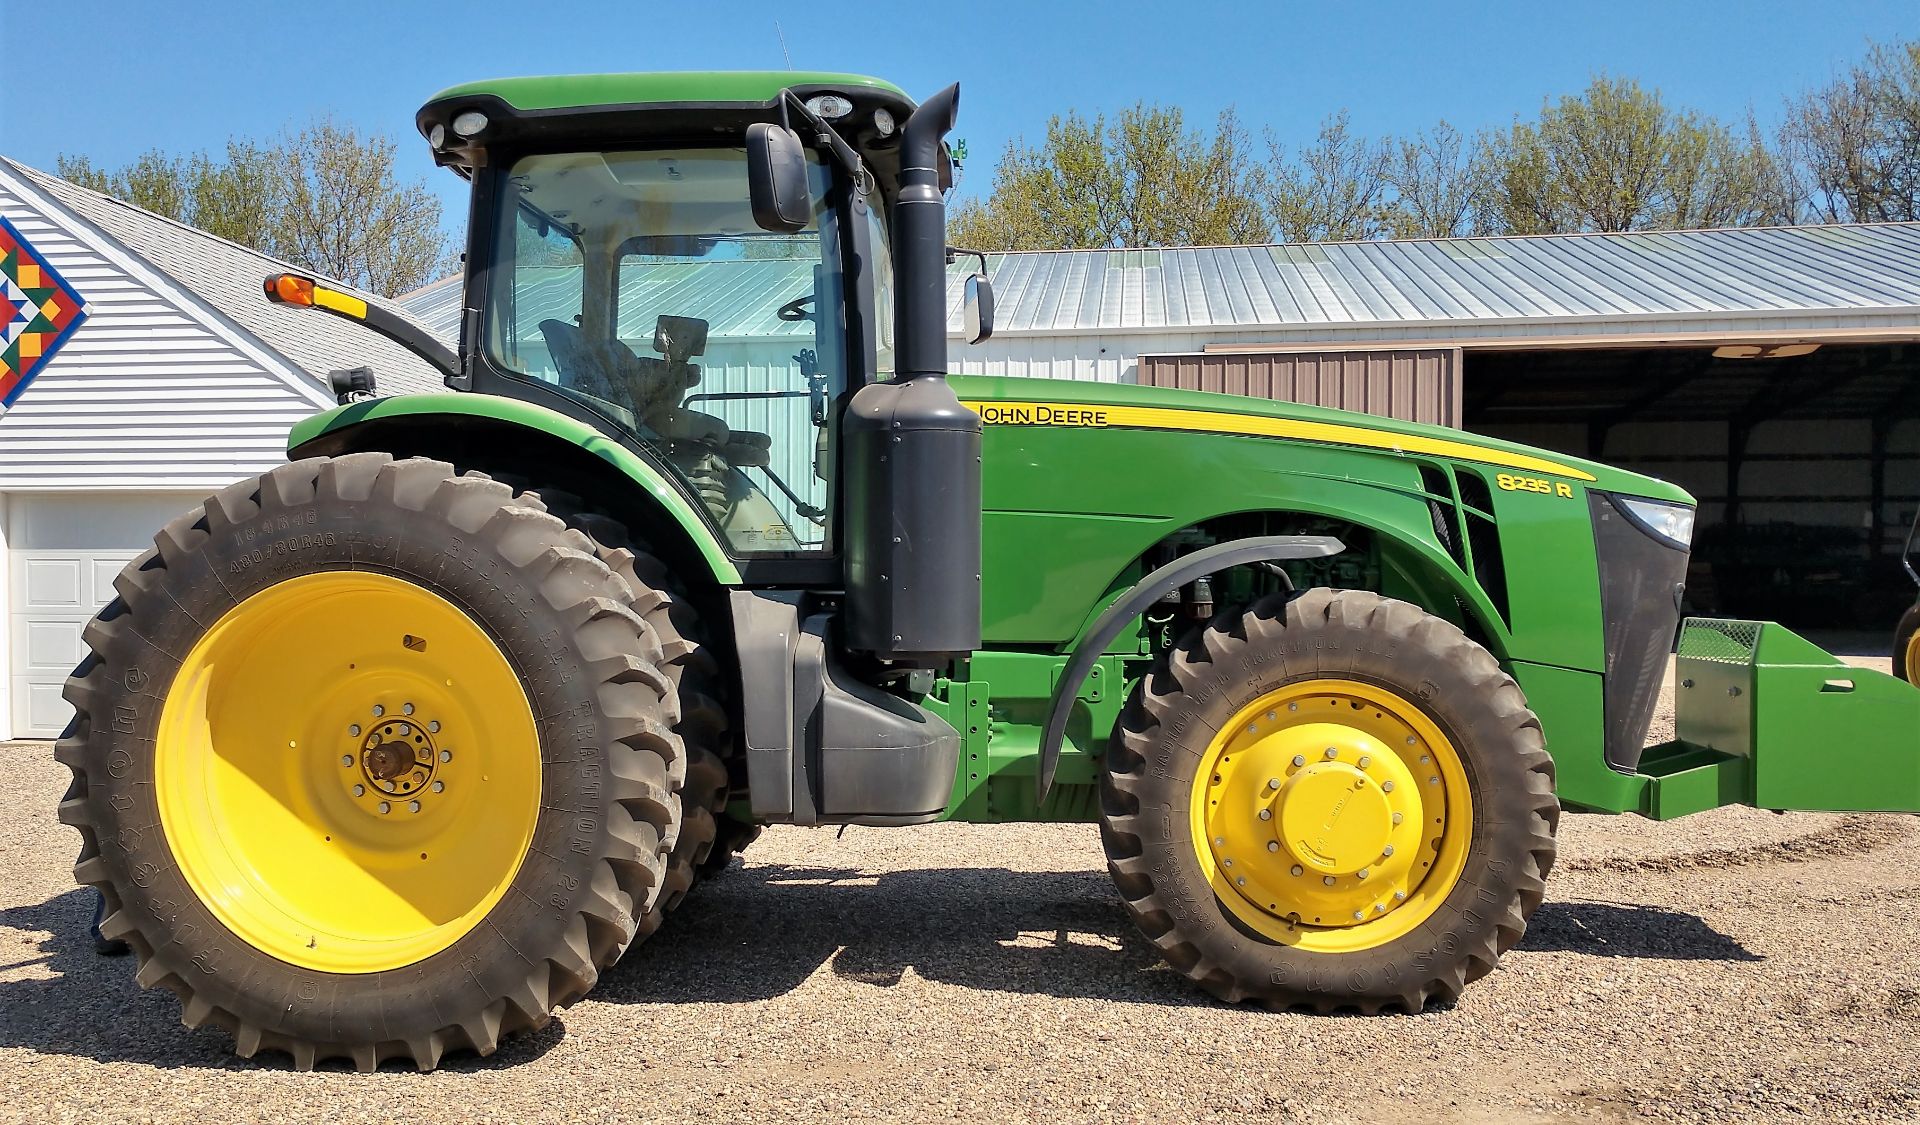 2013 JD 8235R MFWD 235 HP Tractor with power shift. Serial #1RW8235RPDP074834 with 800 hours. - Image 3 of 3